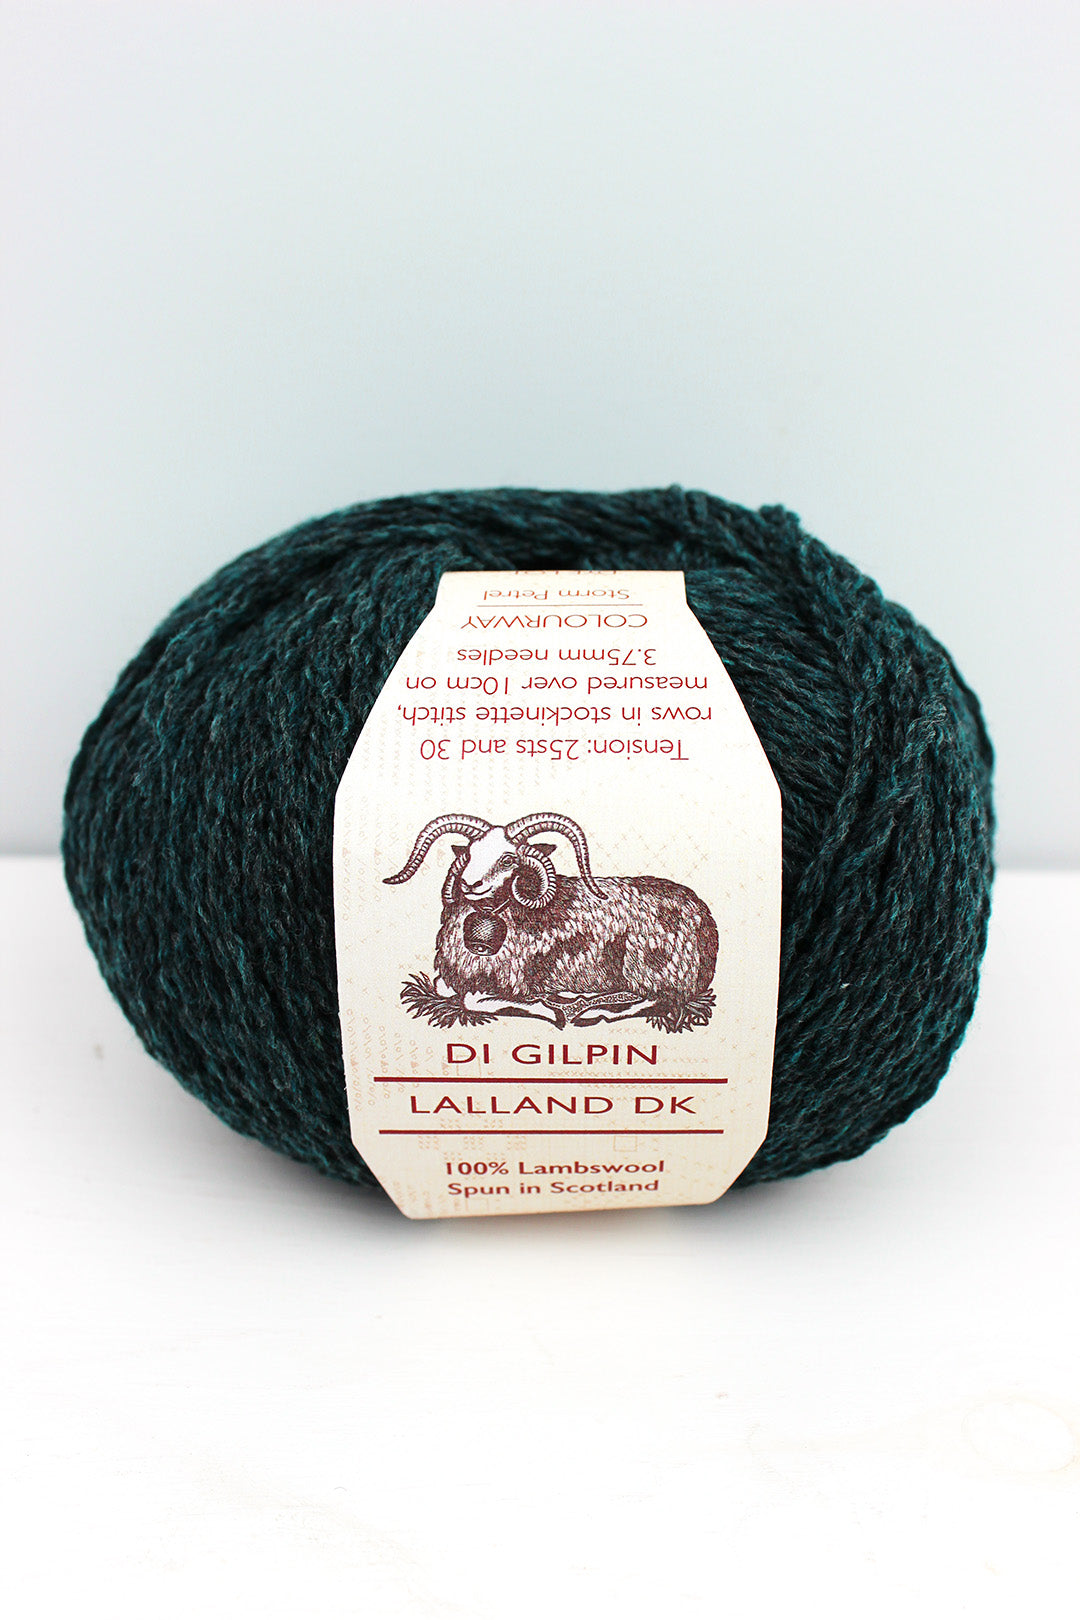 Di Gilpin yarn in a teal Storm Petrel colourway. Scottish Textiles Showcase